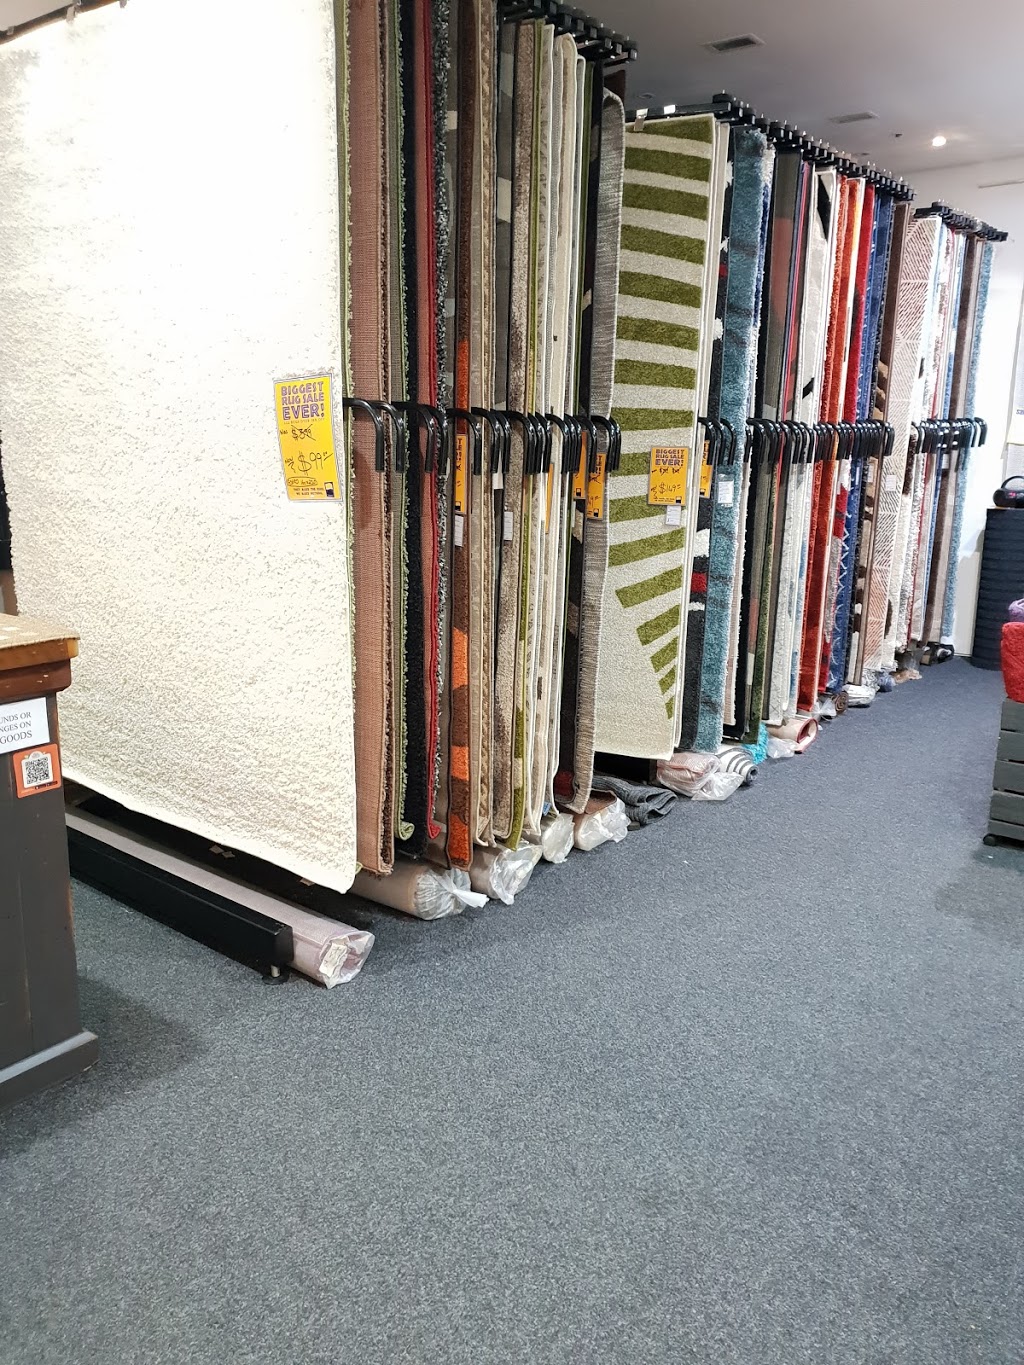 Rugs 4 Less Australia | Capalaba Park Shopping Centre Cnr Mount Cotton Rd and, Redland Bay Rd, Capalaba QLD 4157, Australia | Phone: (07) 3823 1269